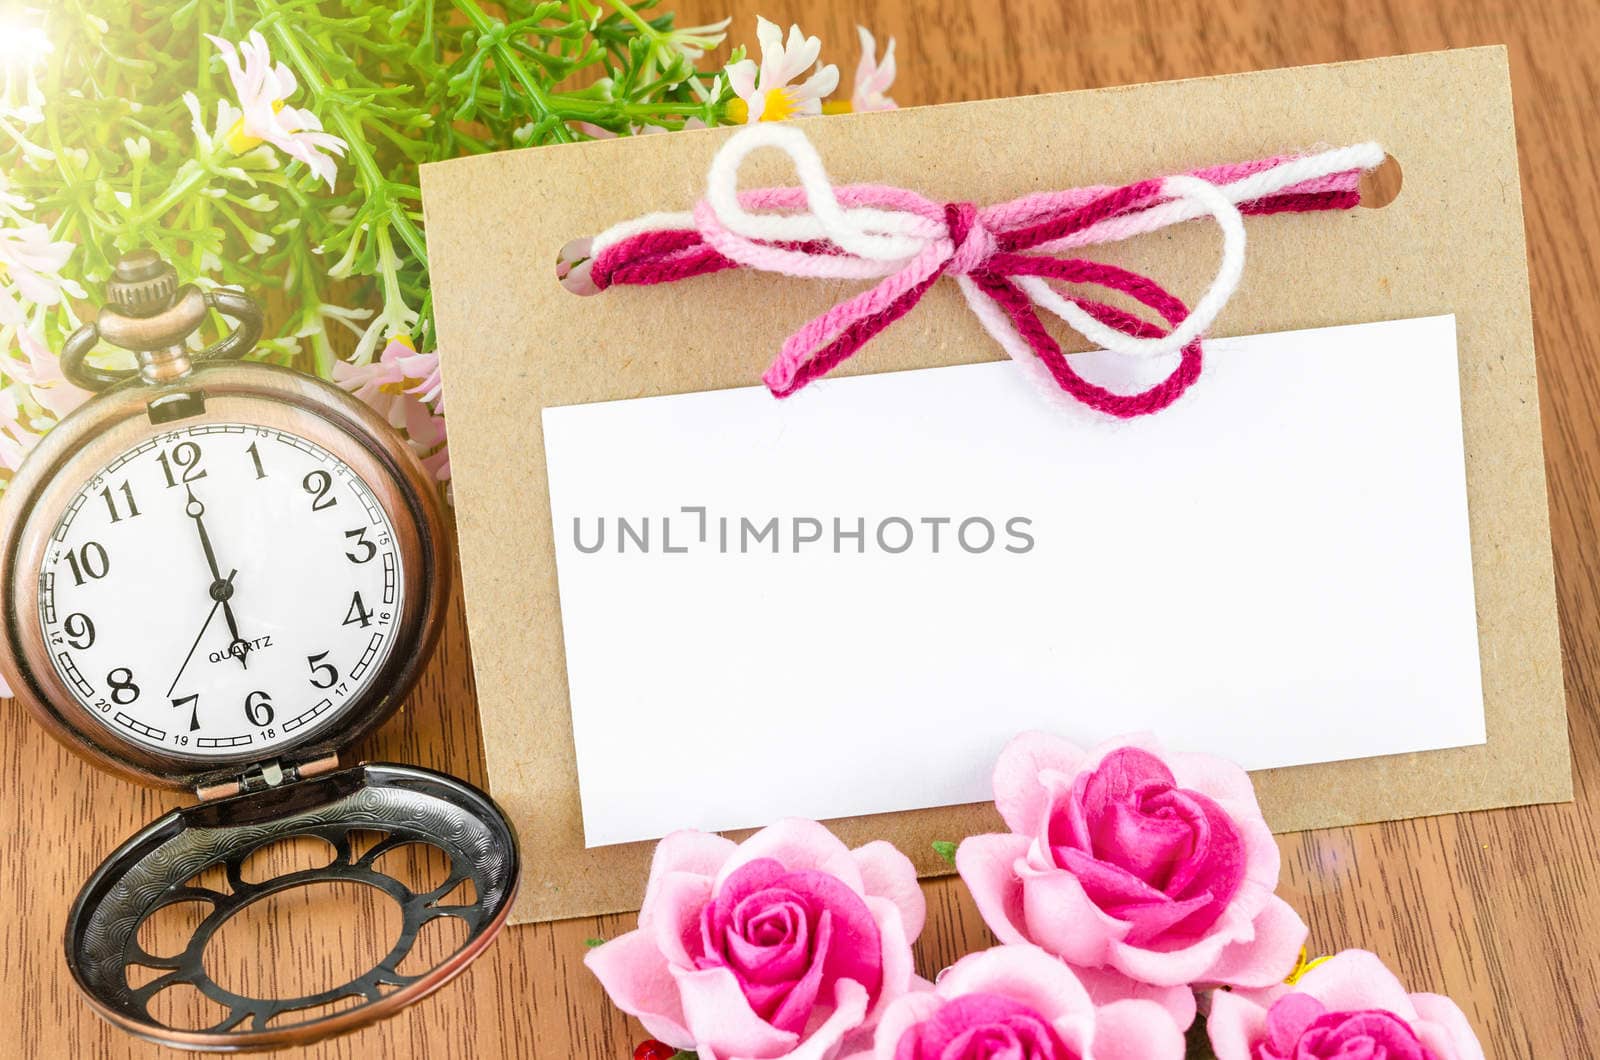 Blank paper tag and pocket watch with pink rose on wooden background.